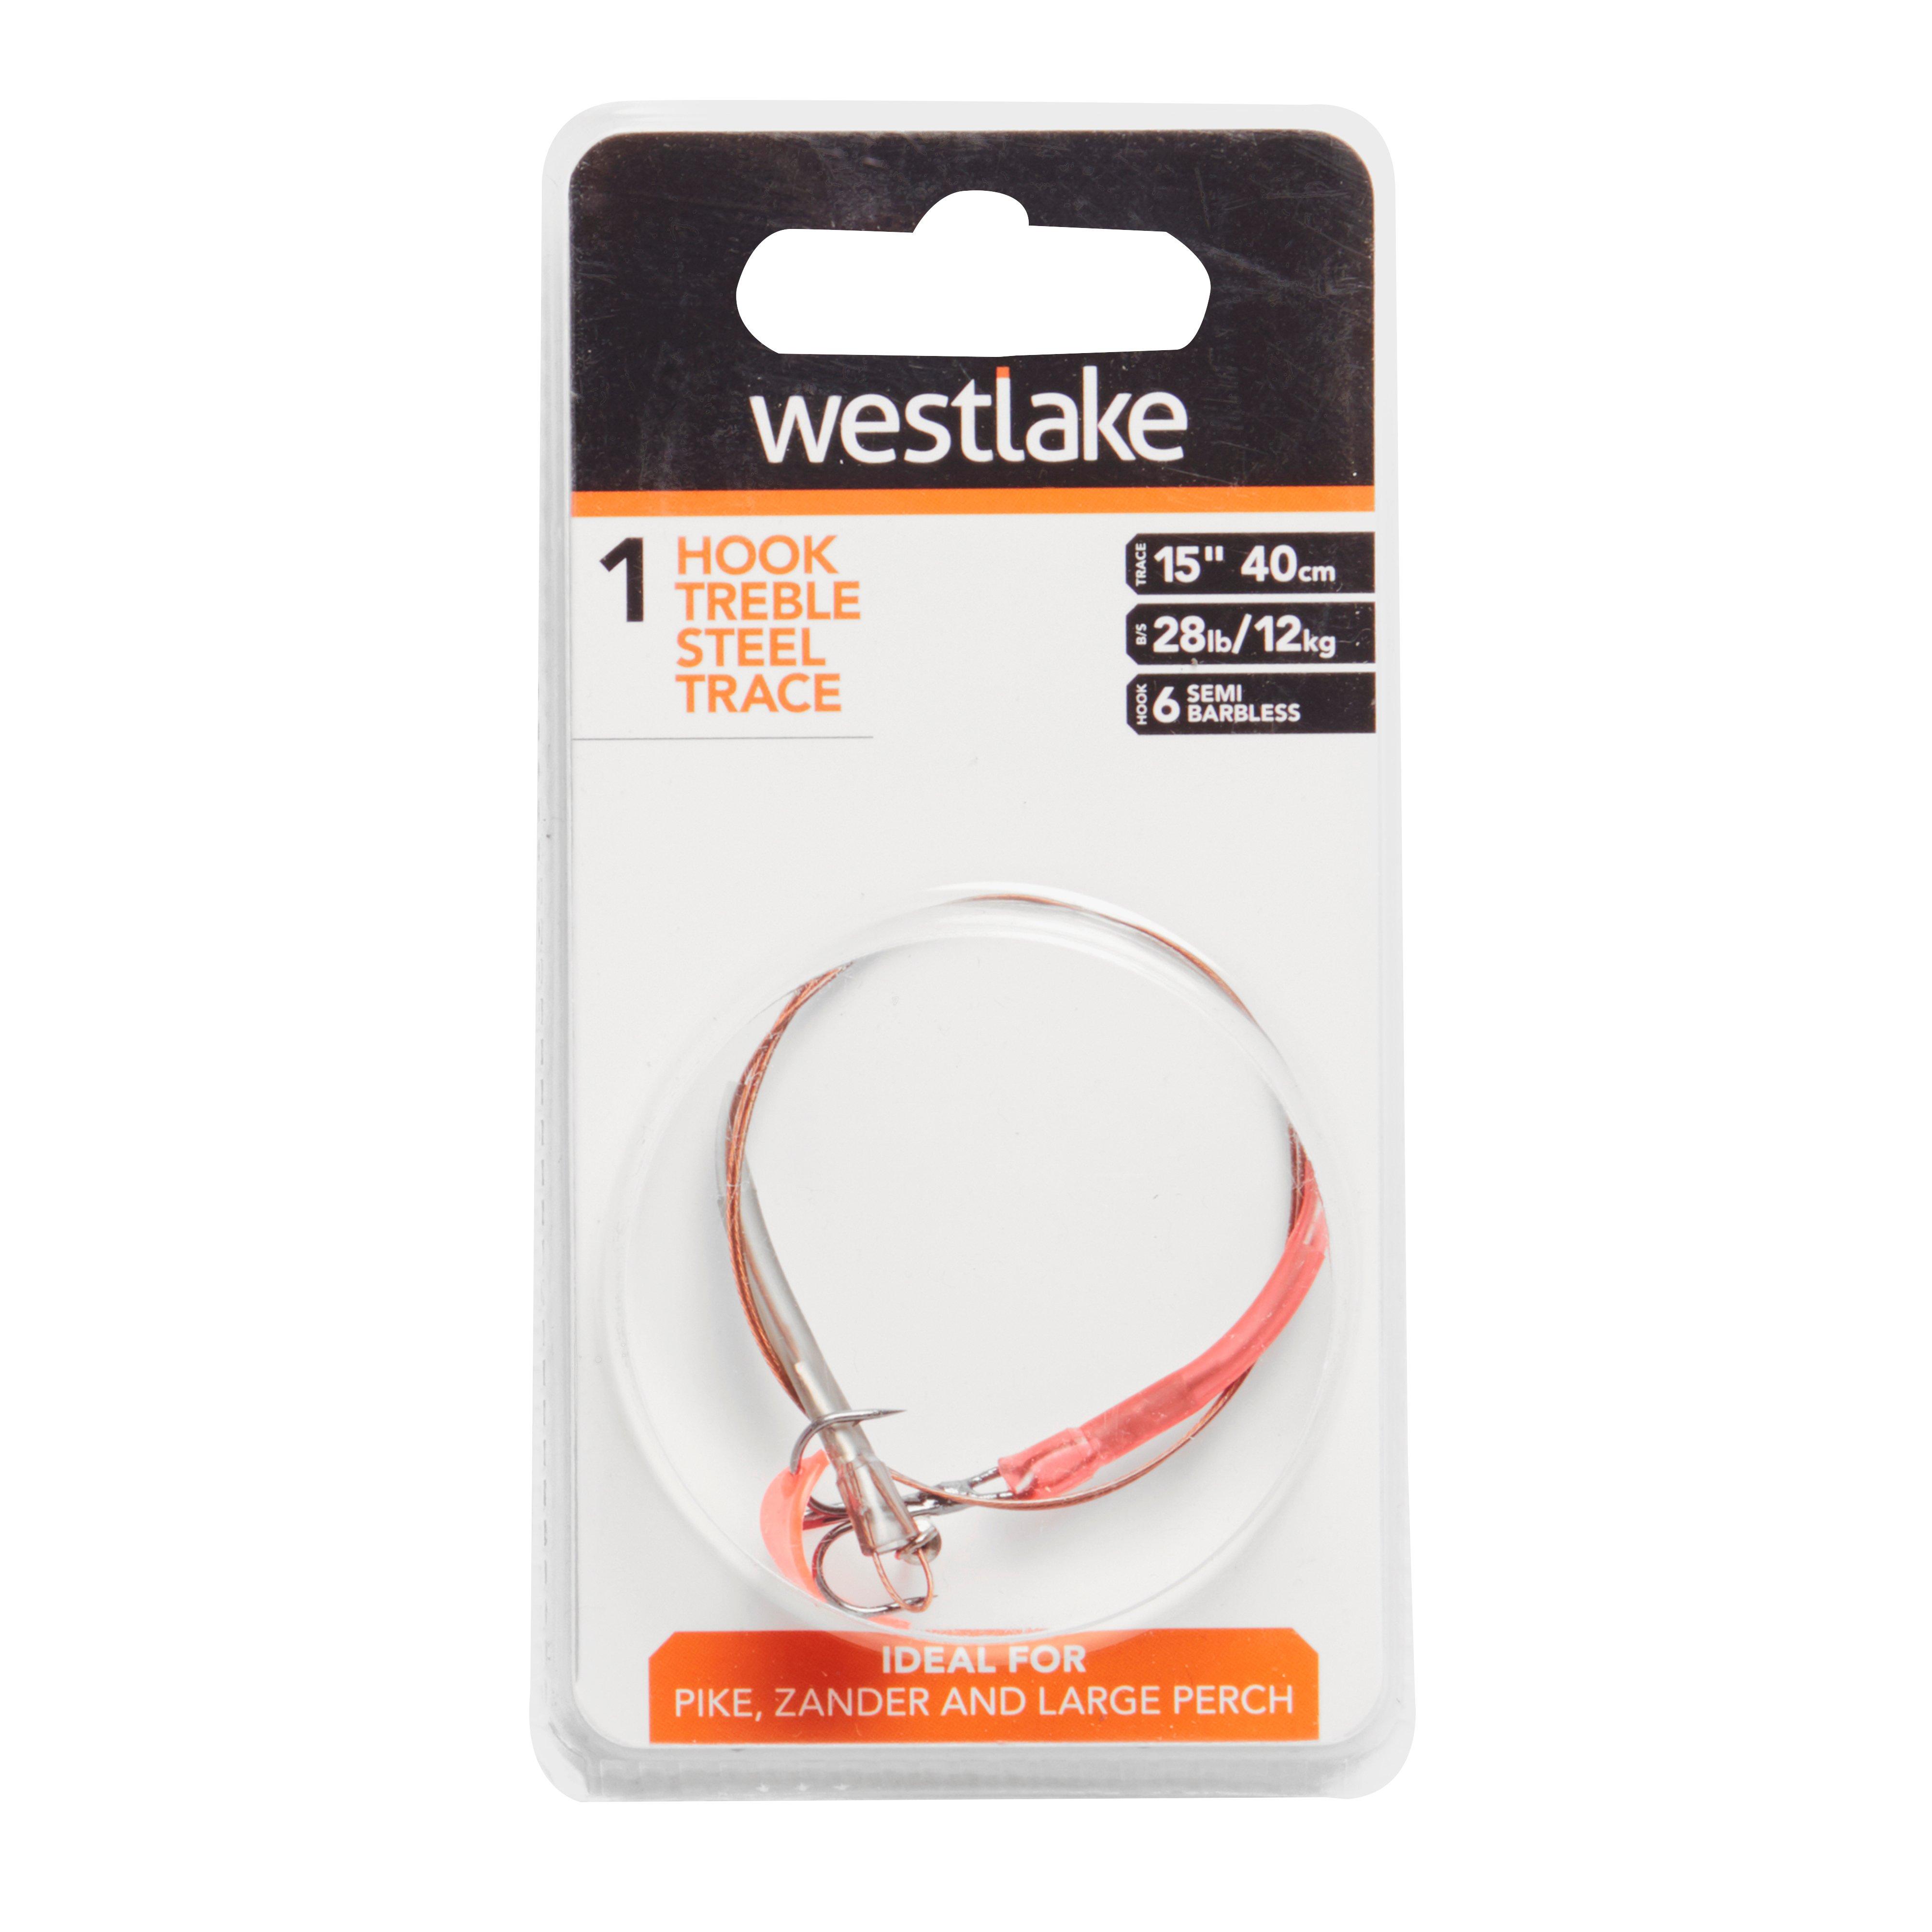 Westlake Snap Tackle Size 6 Rig Review